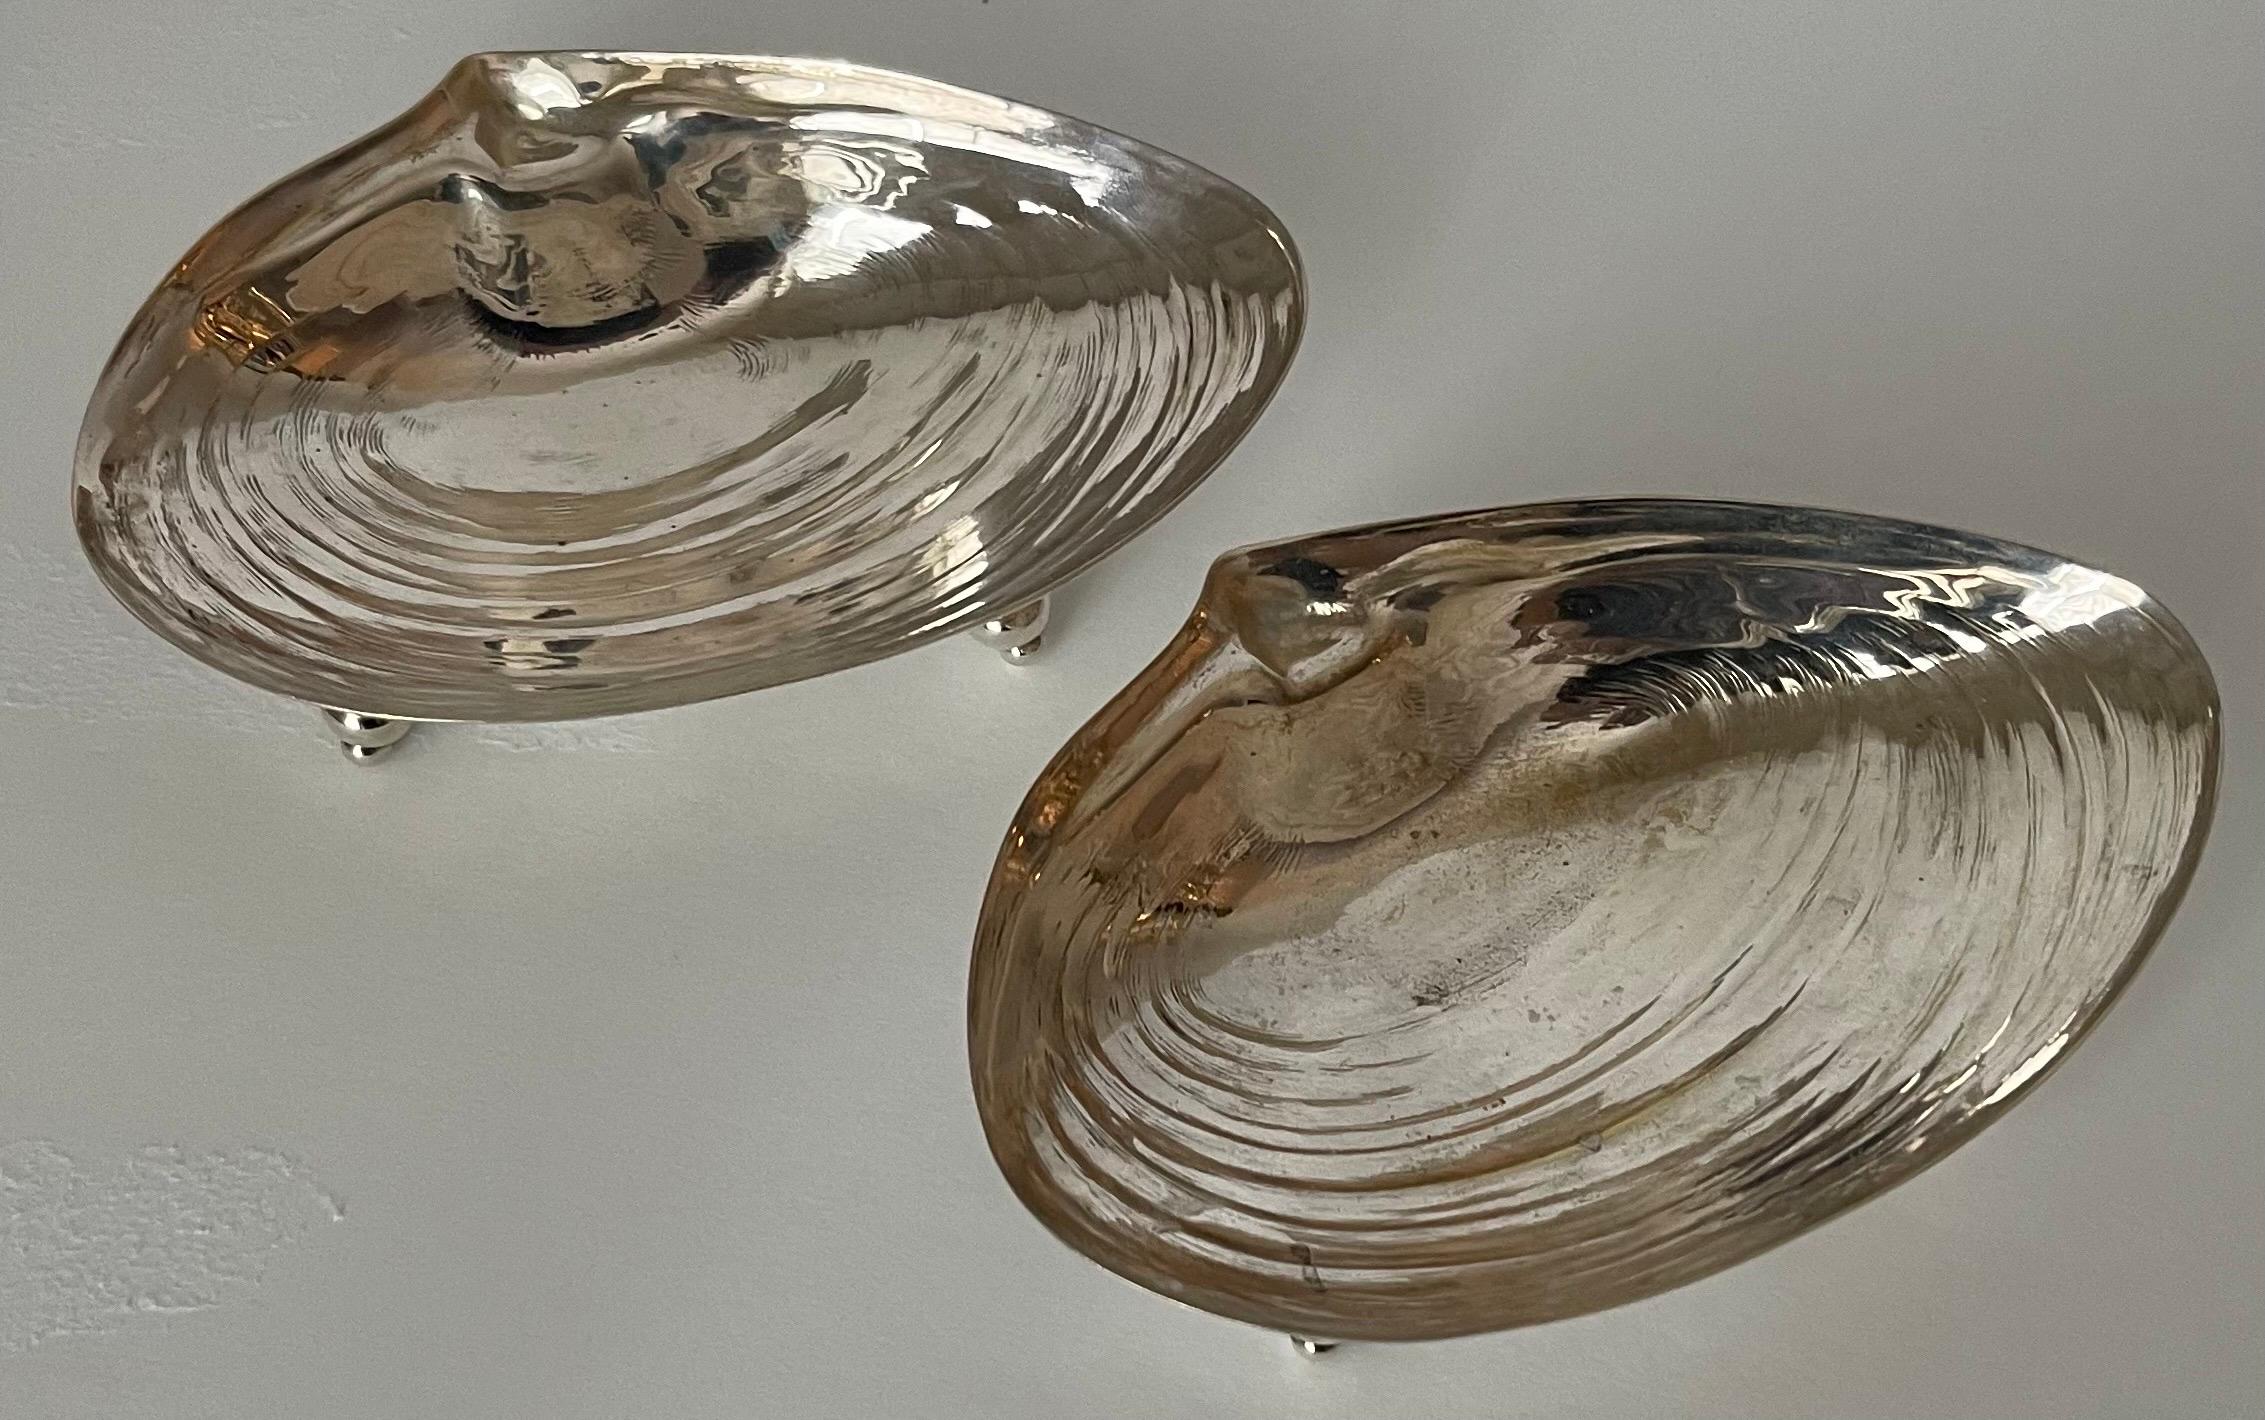 Pair of silver plated shell candy dishes or ashtrays. No makers mark or brand stamp.